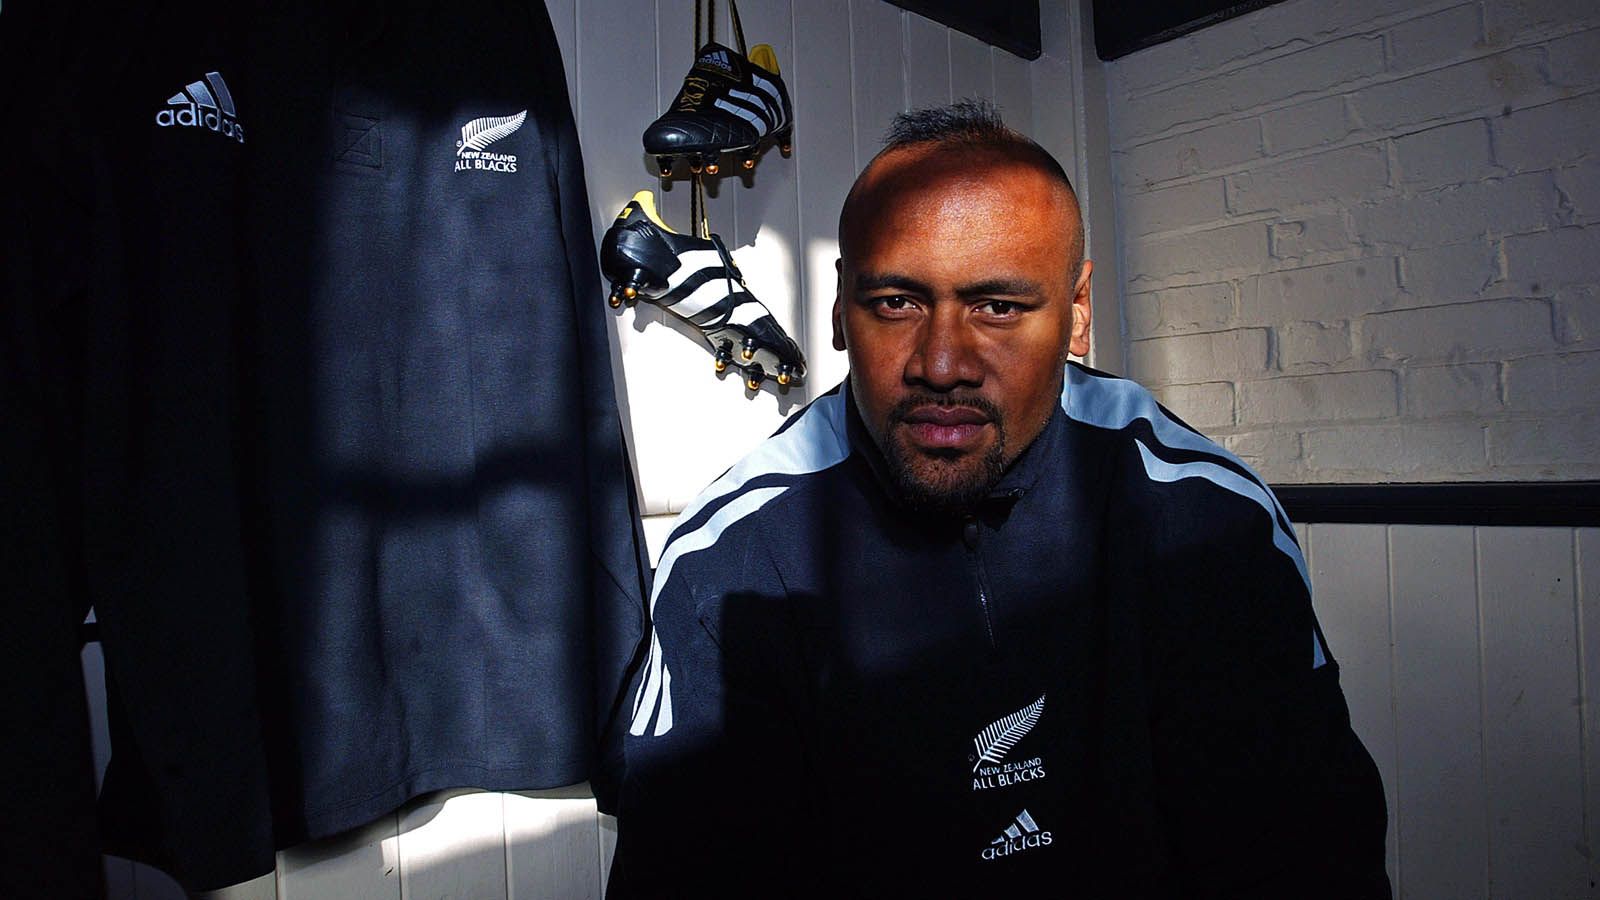 Jonah Lomu: The 'Shakespearean' rugby hero who changed the game forever